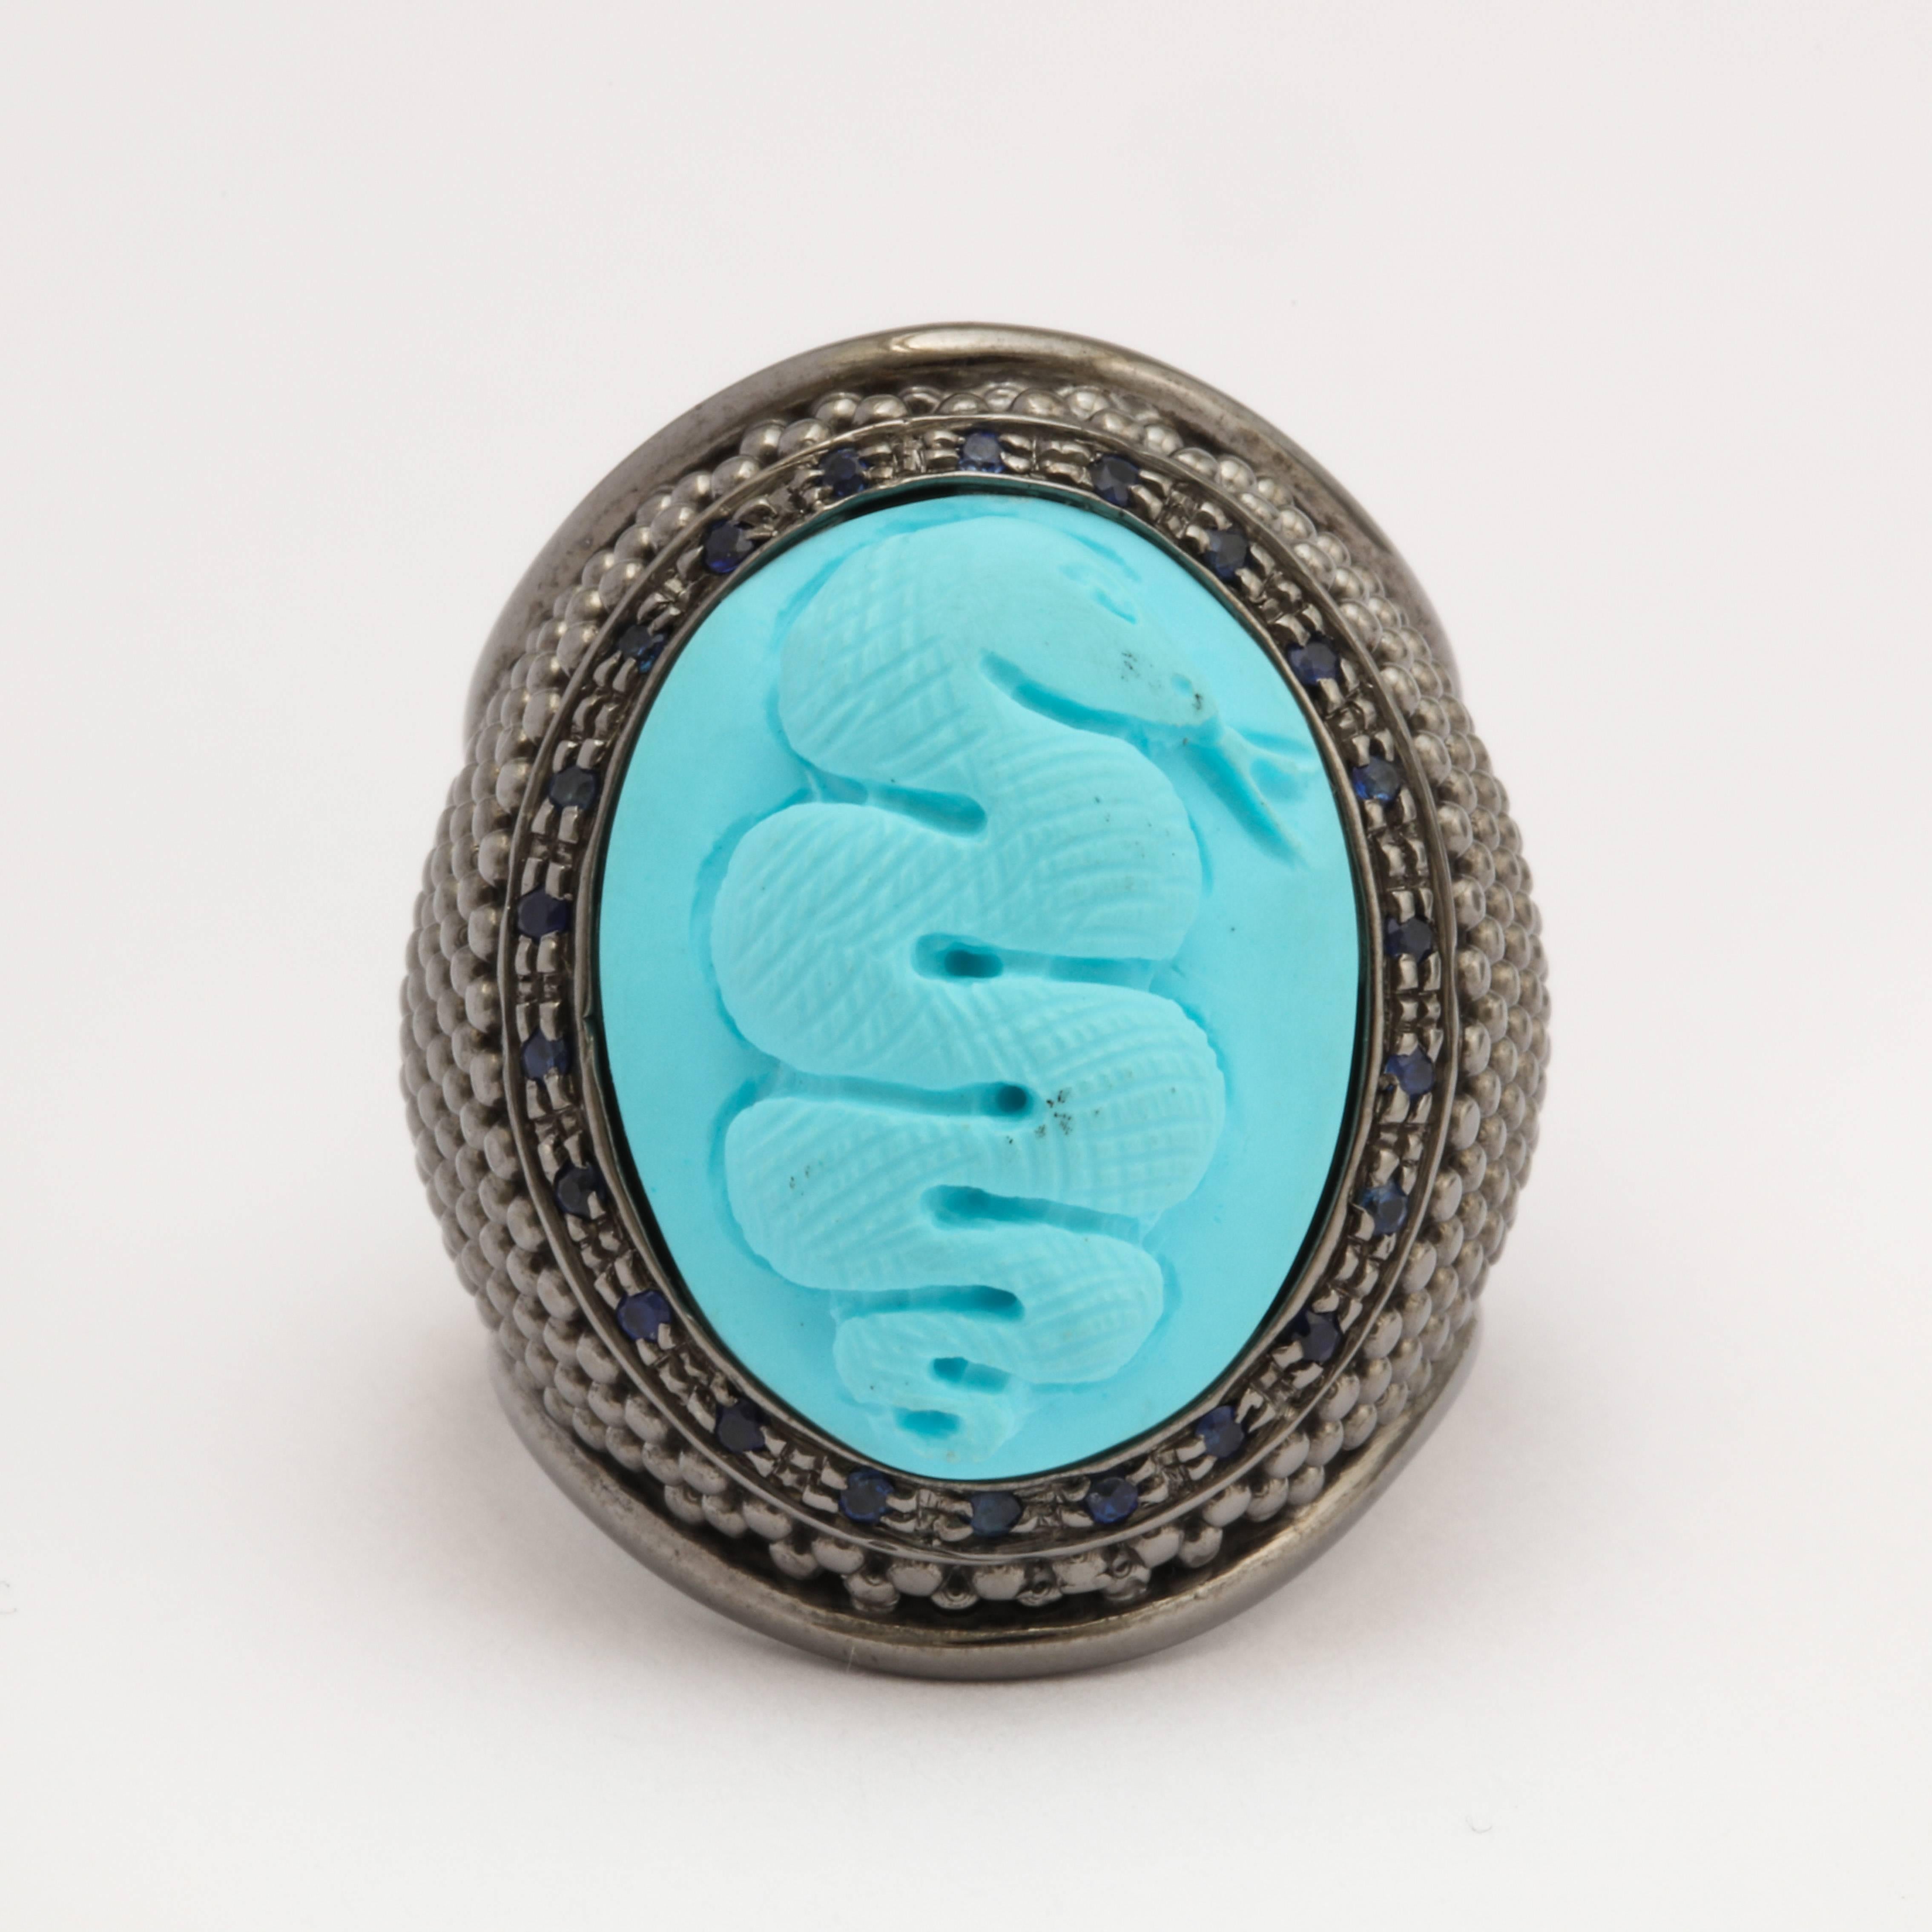 20mm turquoise shell cameo, set in sterling silver black rhodium plated with blue sapphires.